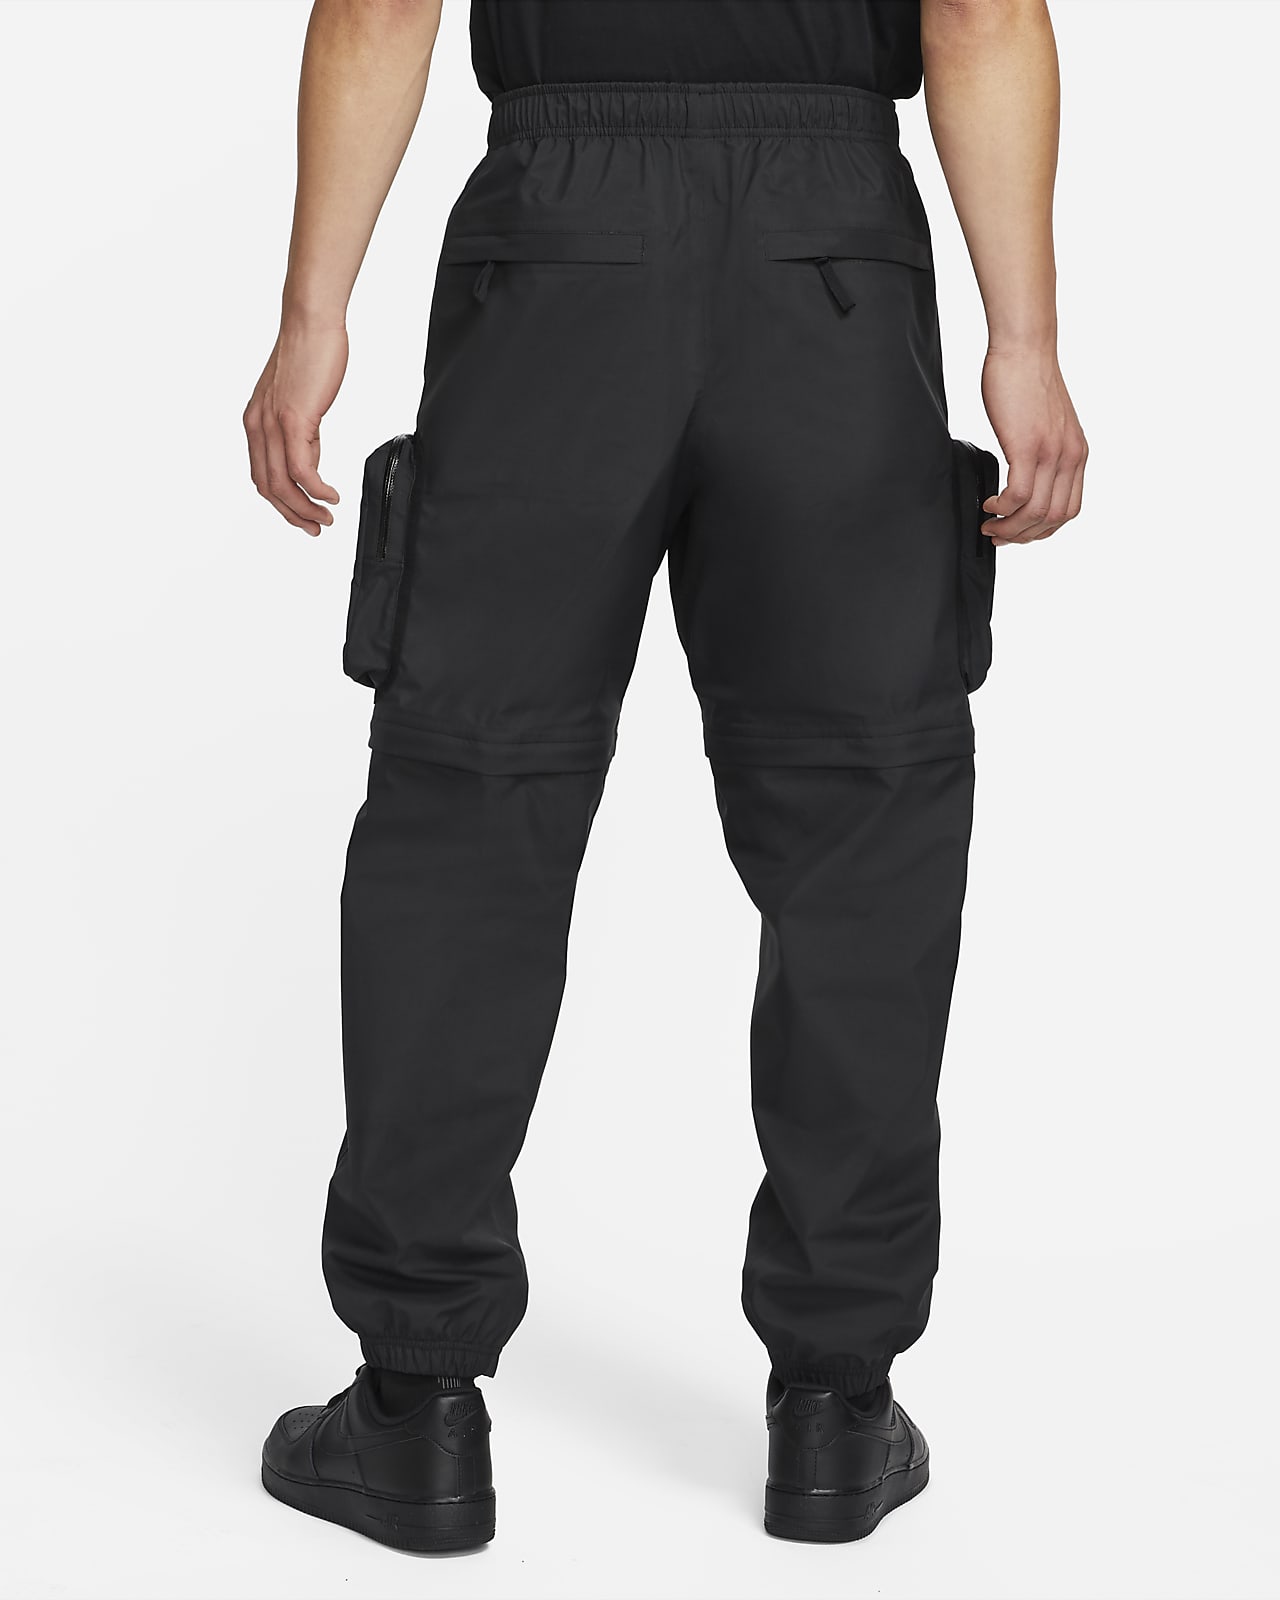 Nike x Undercover Cargo Pants 